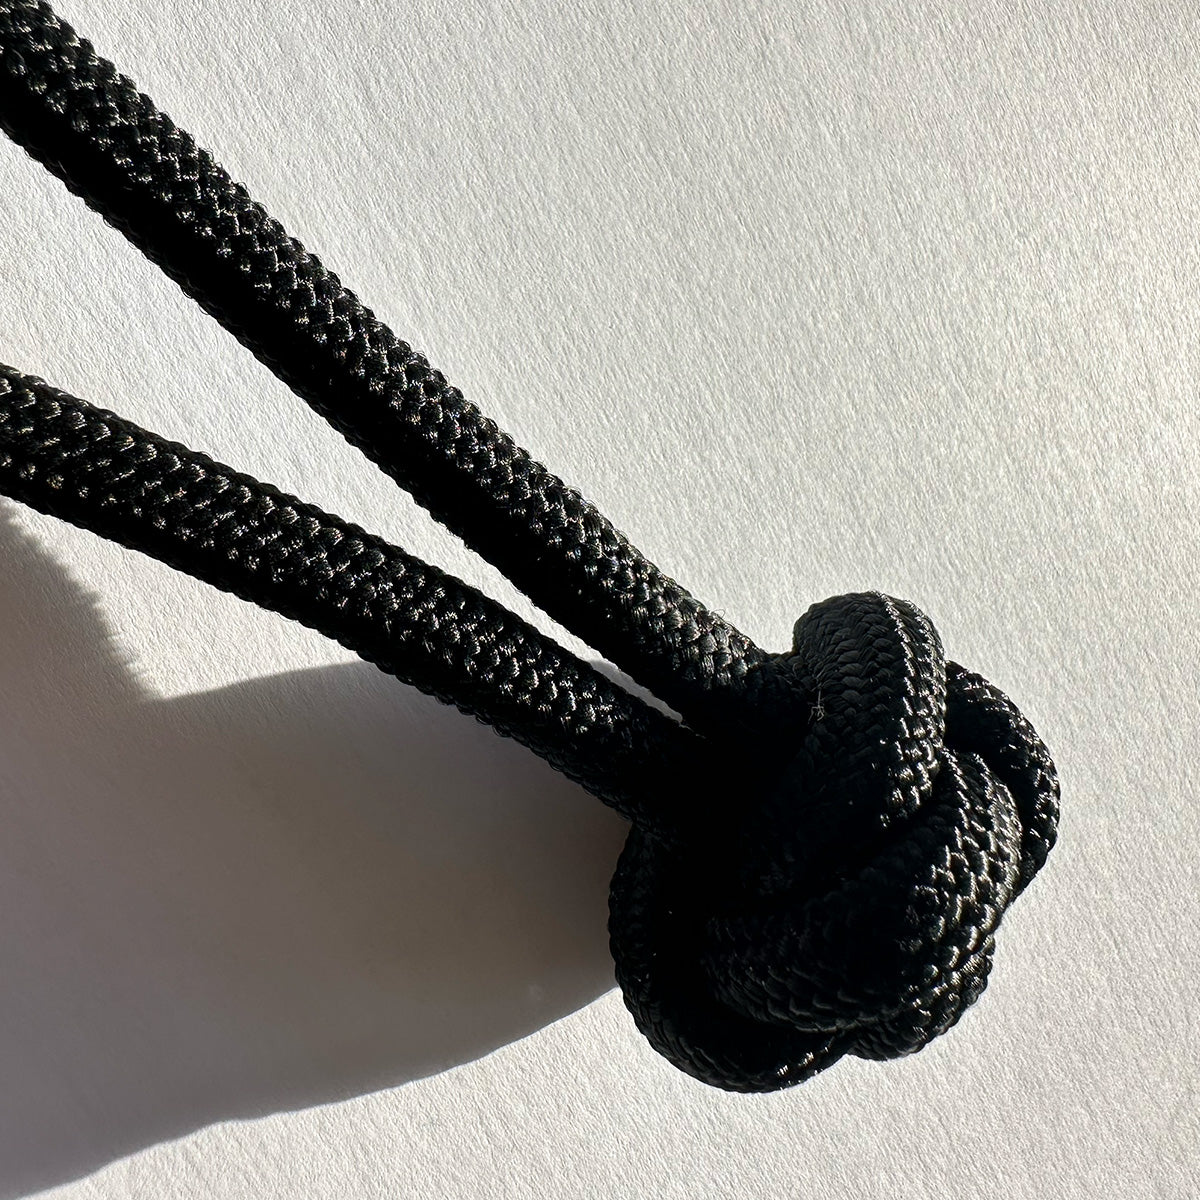 A zoom in on one of the stopper knots.